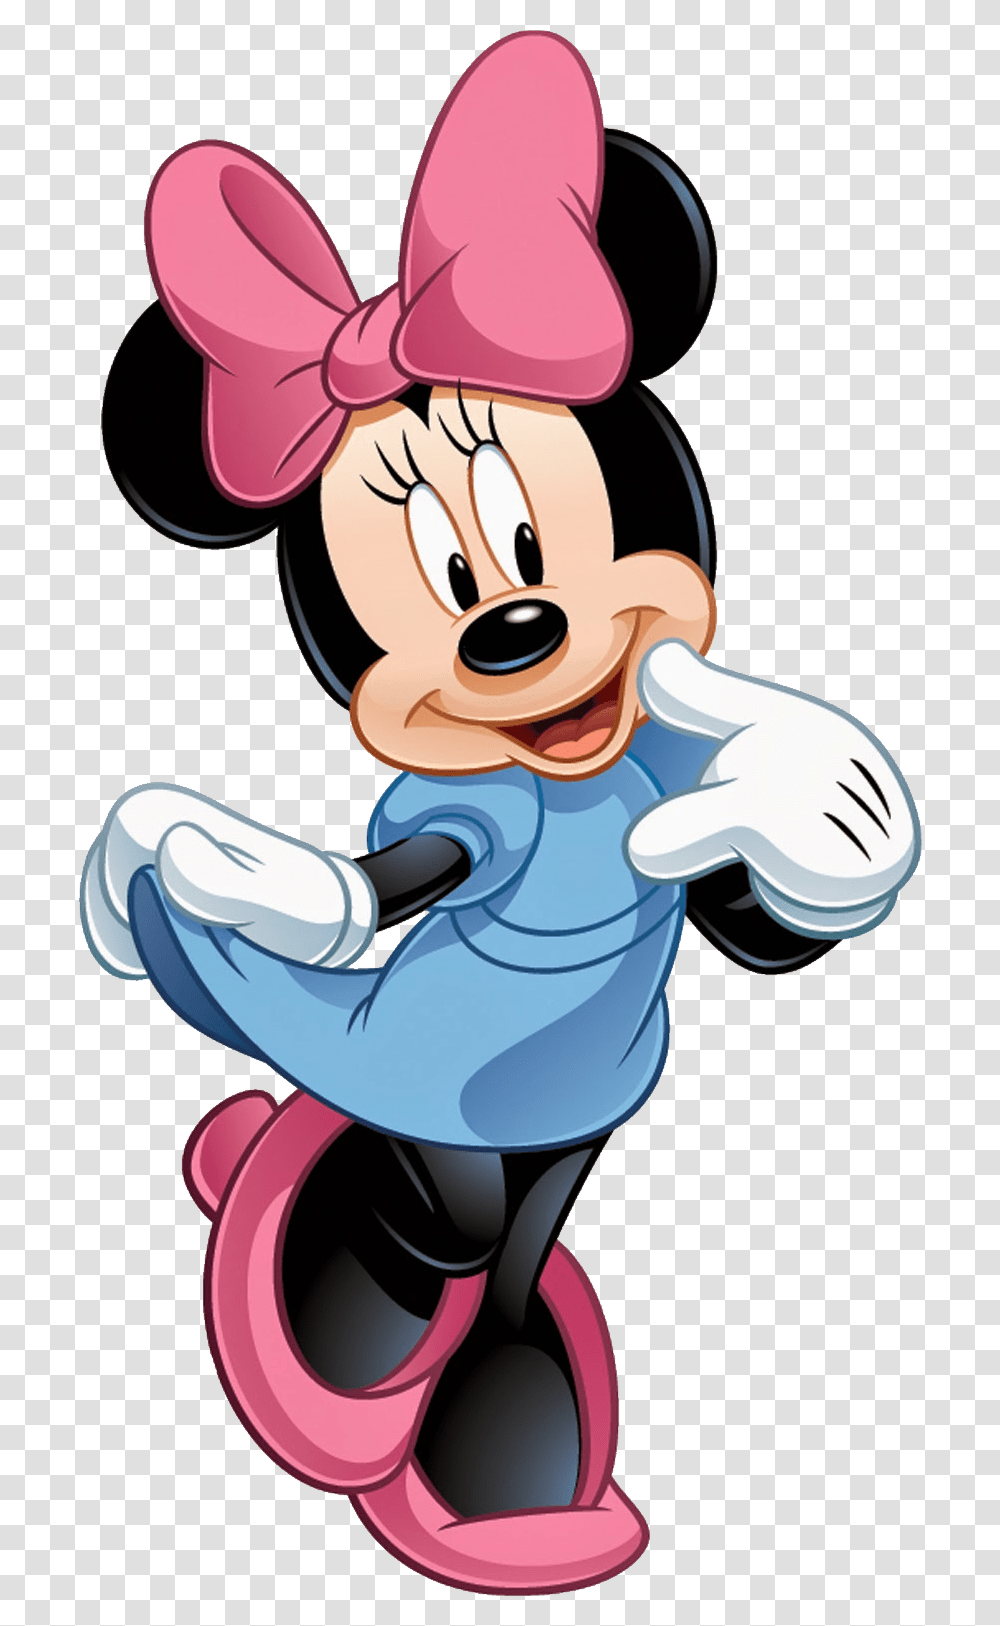 Mickey Mouse Cute Image Minnie Mouse, Outdoors, Water, Graphics, Art Transparent Png